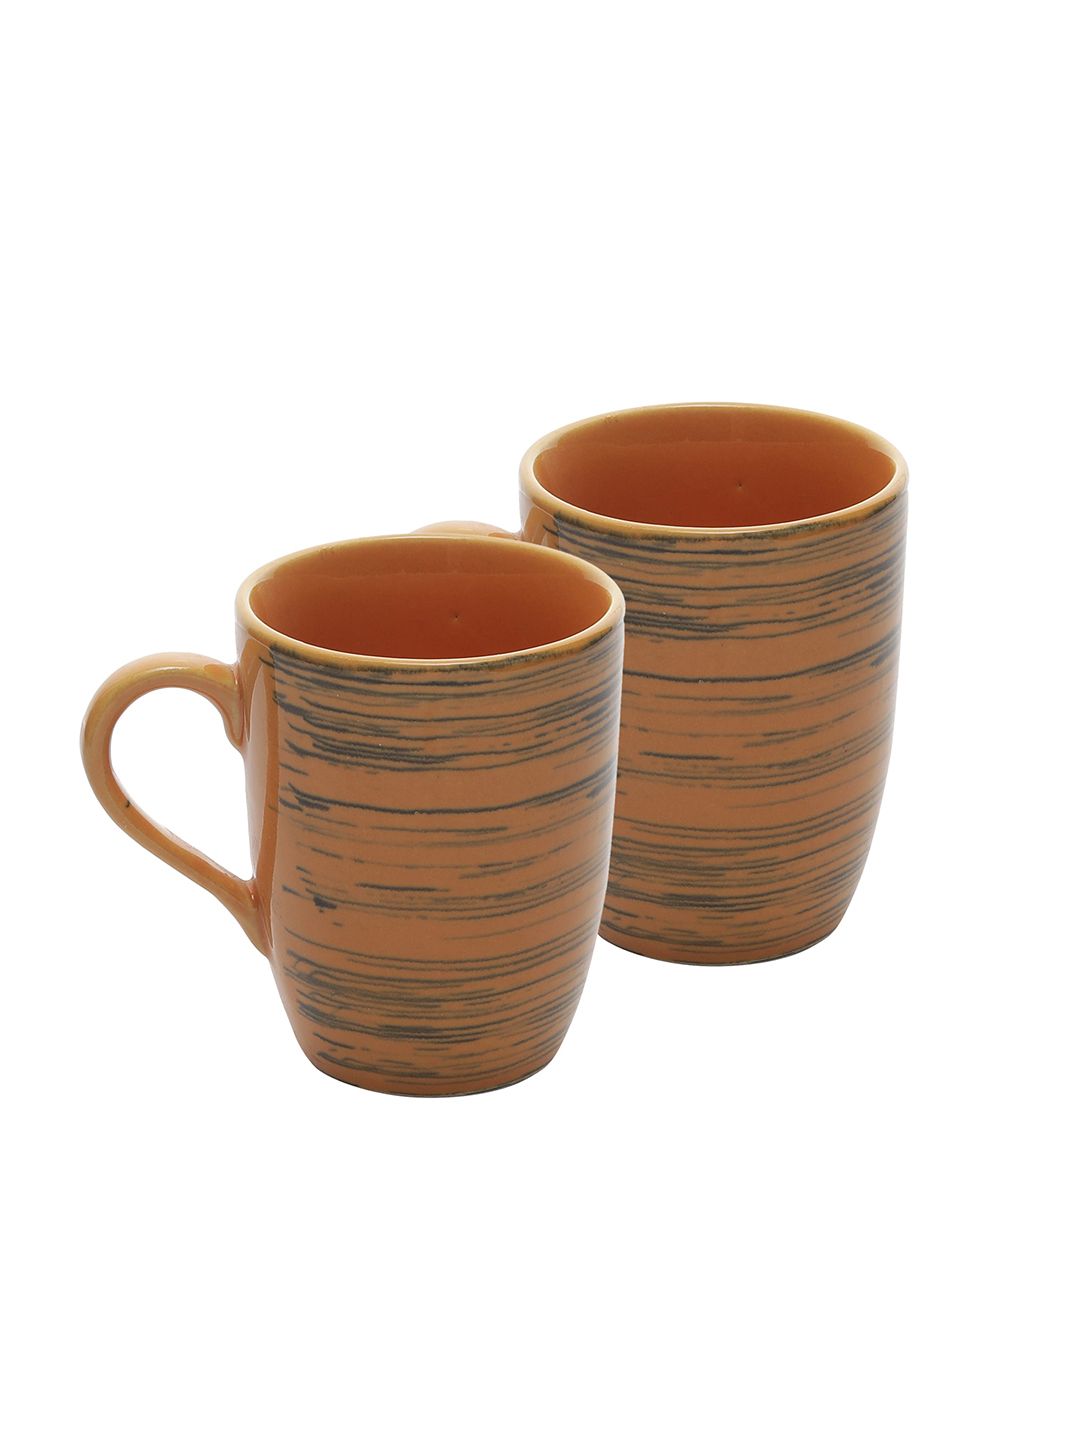 MIAH Decor 2 Mustard Brown & Blue Handcrafted & Hand Painted Printed Stoneware Mugs Price in India